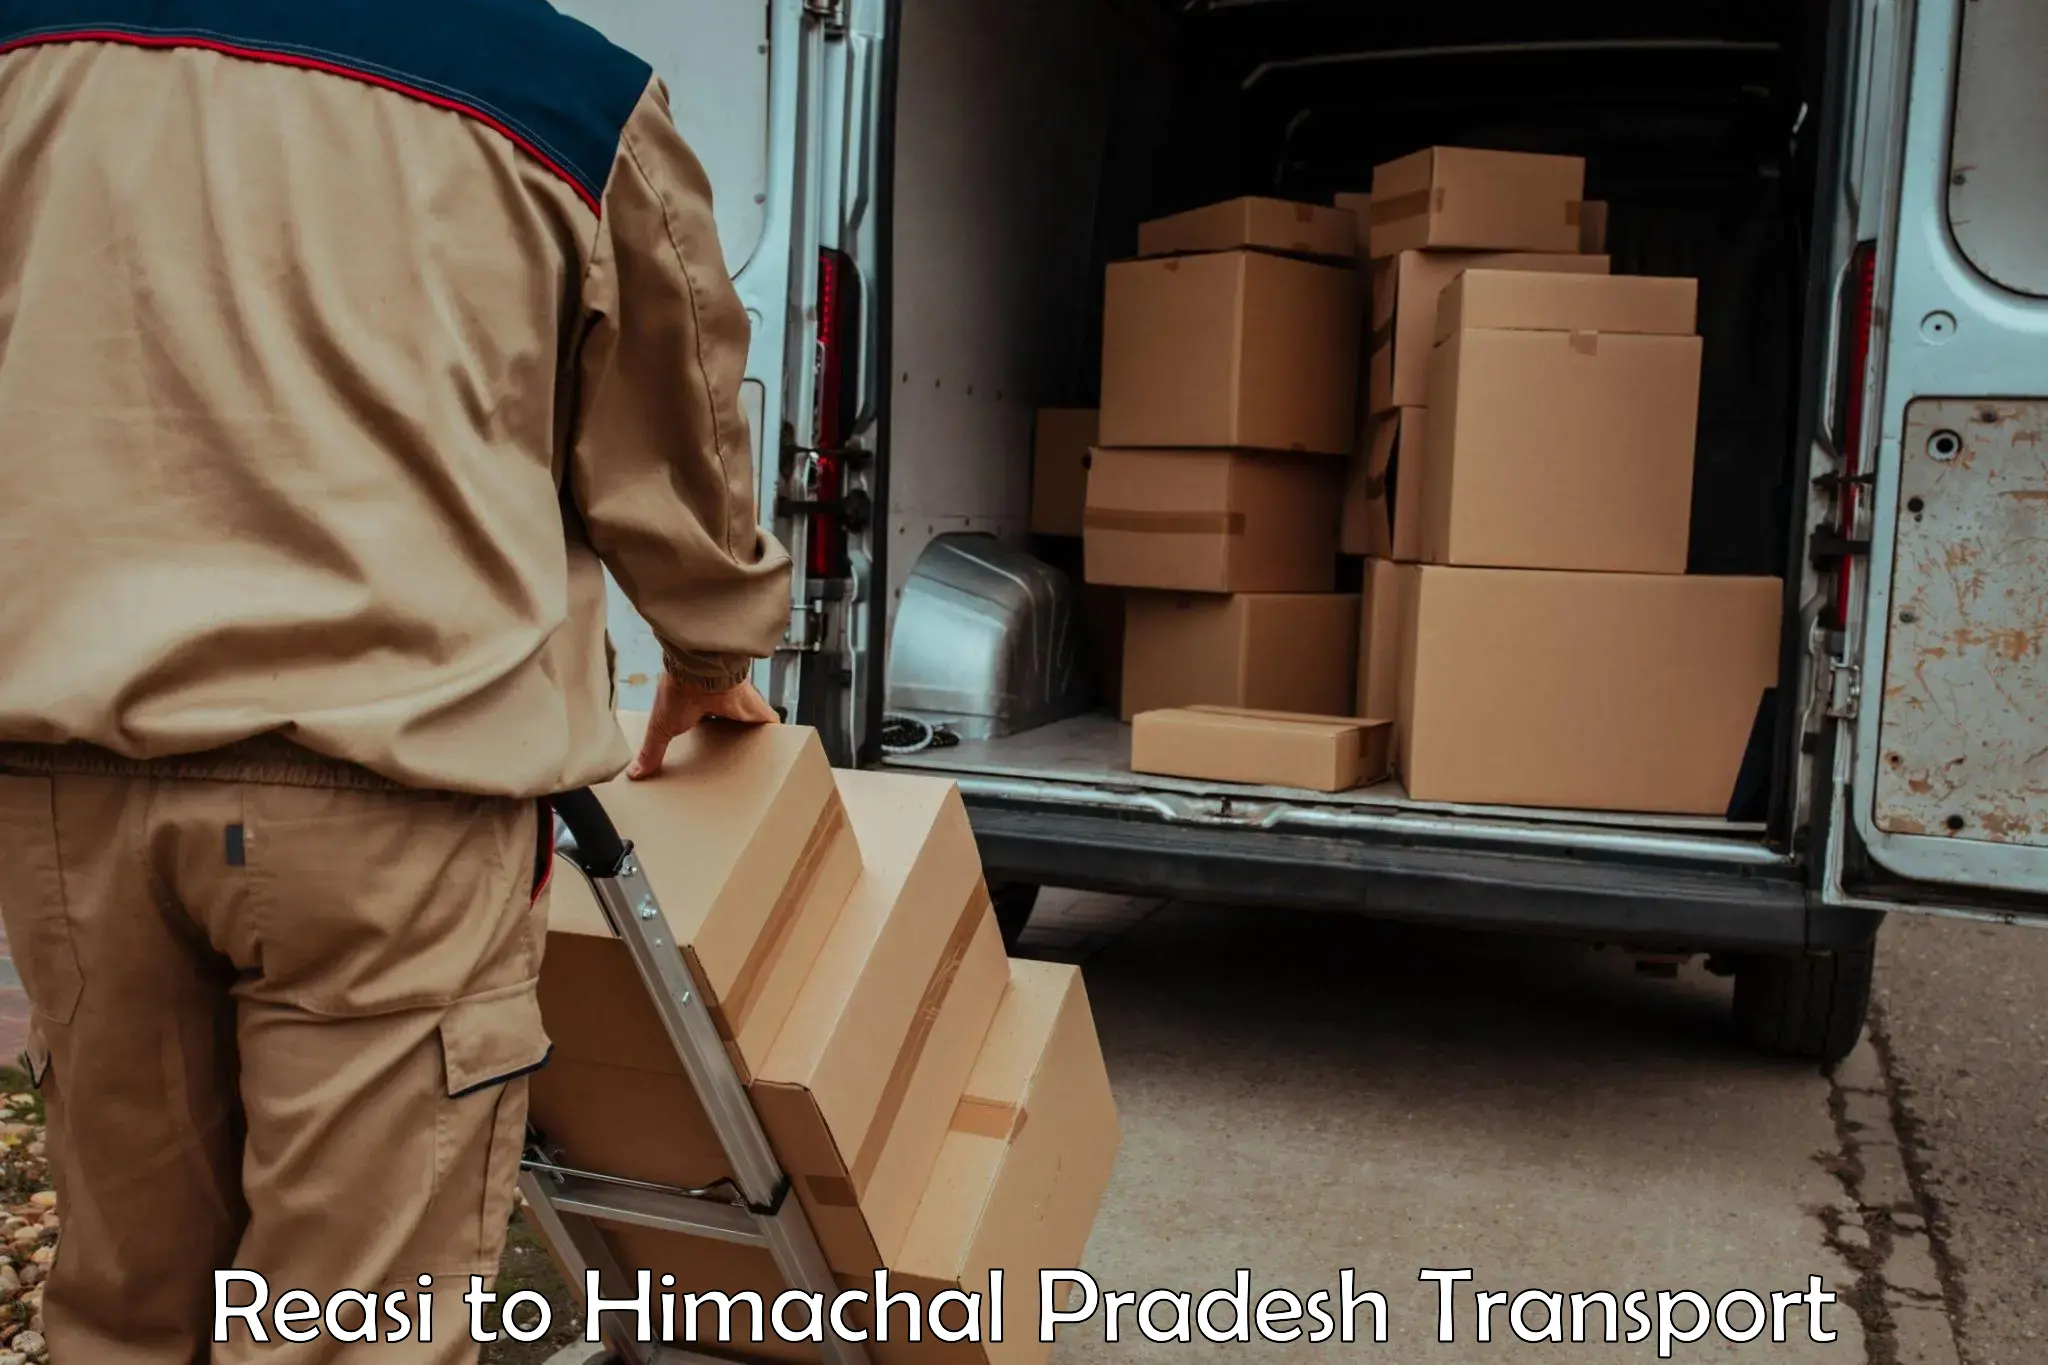 Part load transport service in India Reasi to Dheera